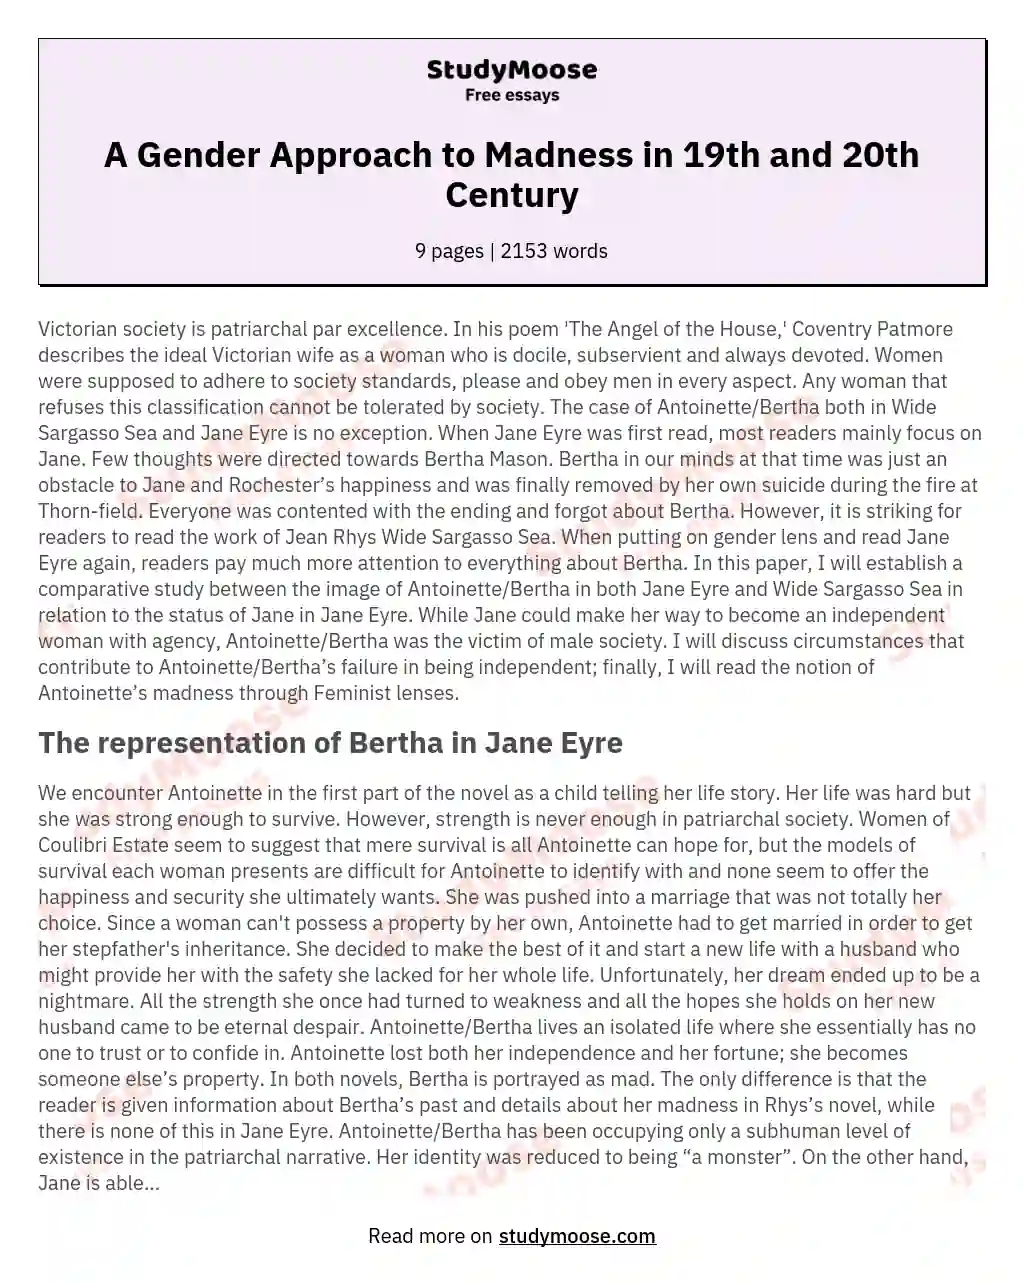 A Gender Approach to Madness in 19th and 20th Century essay